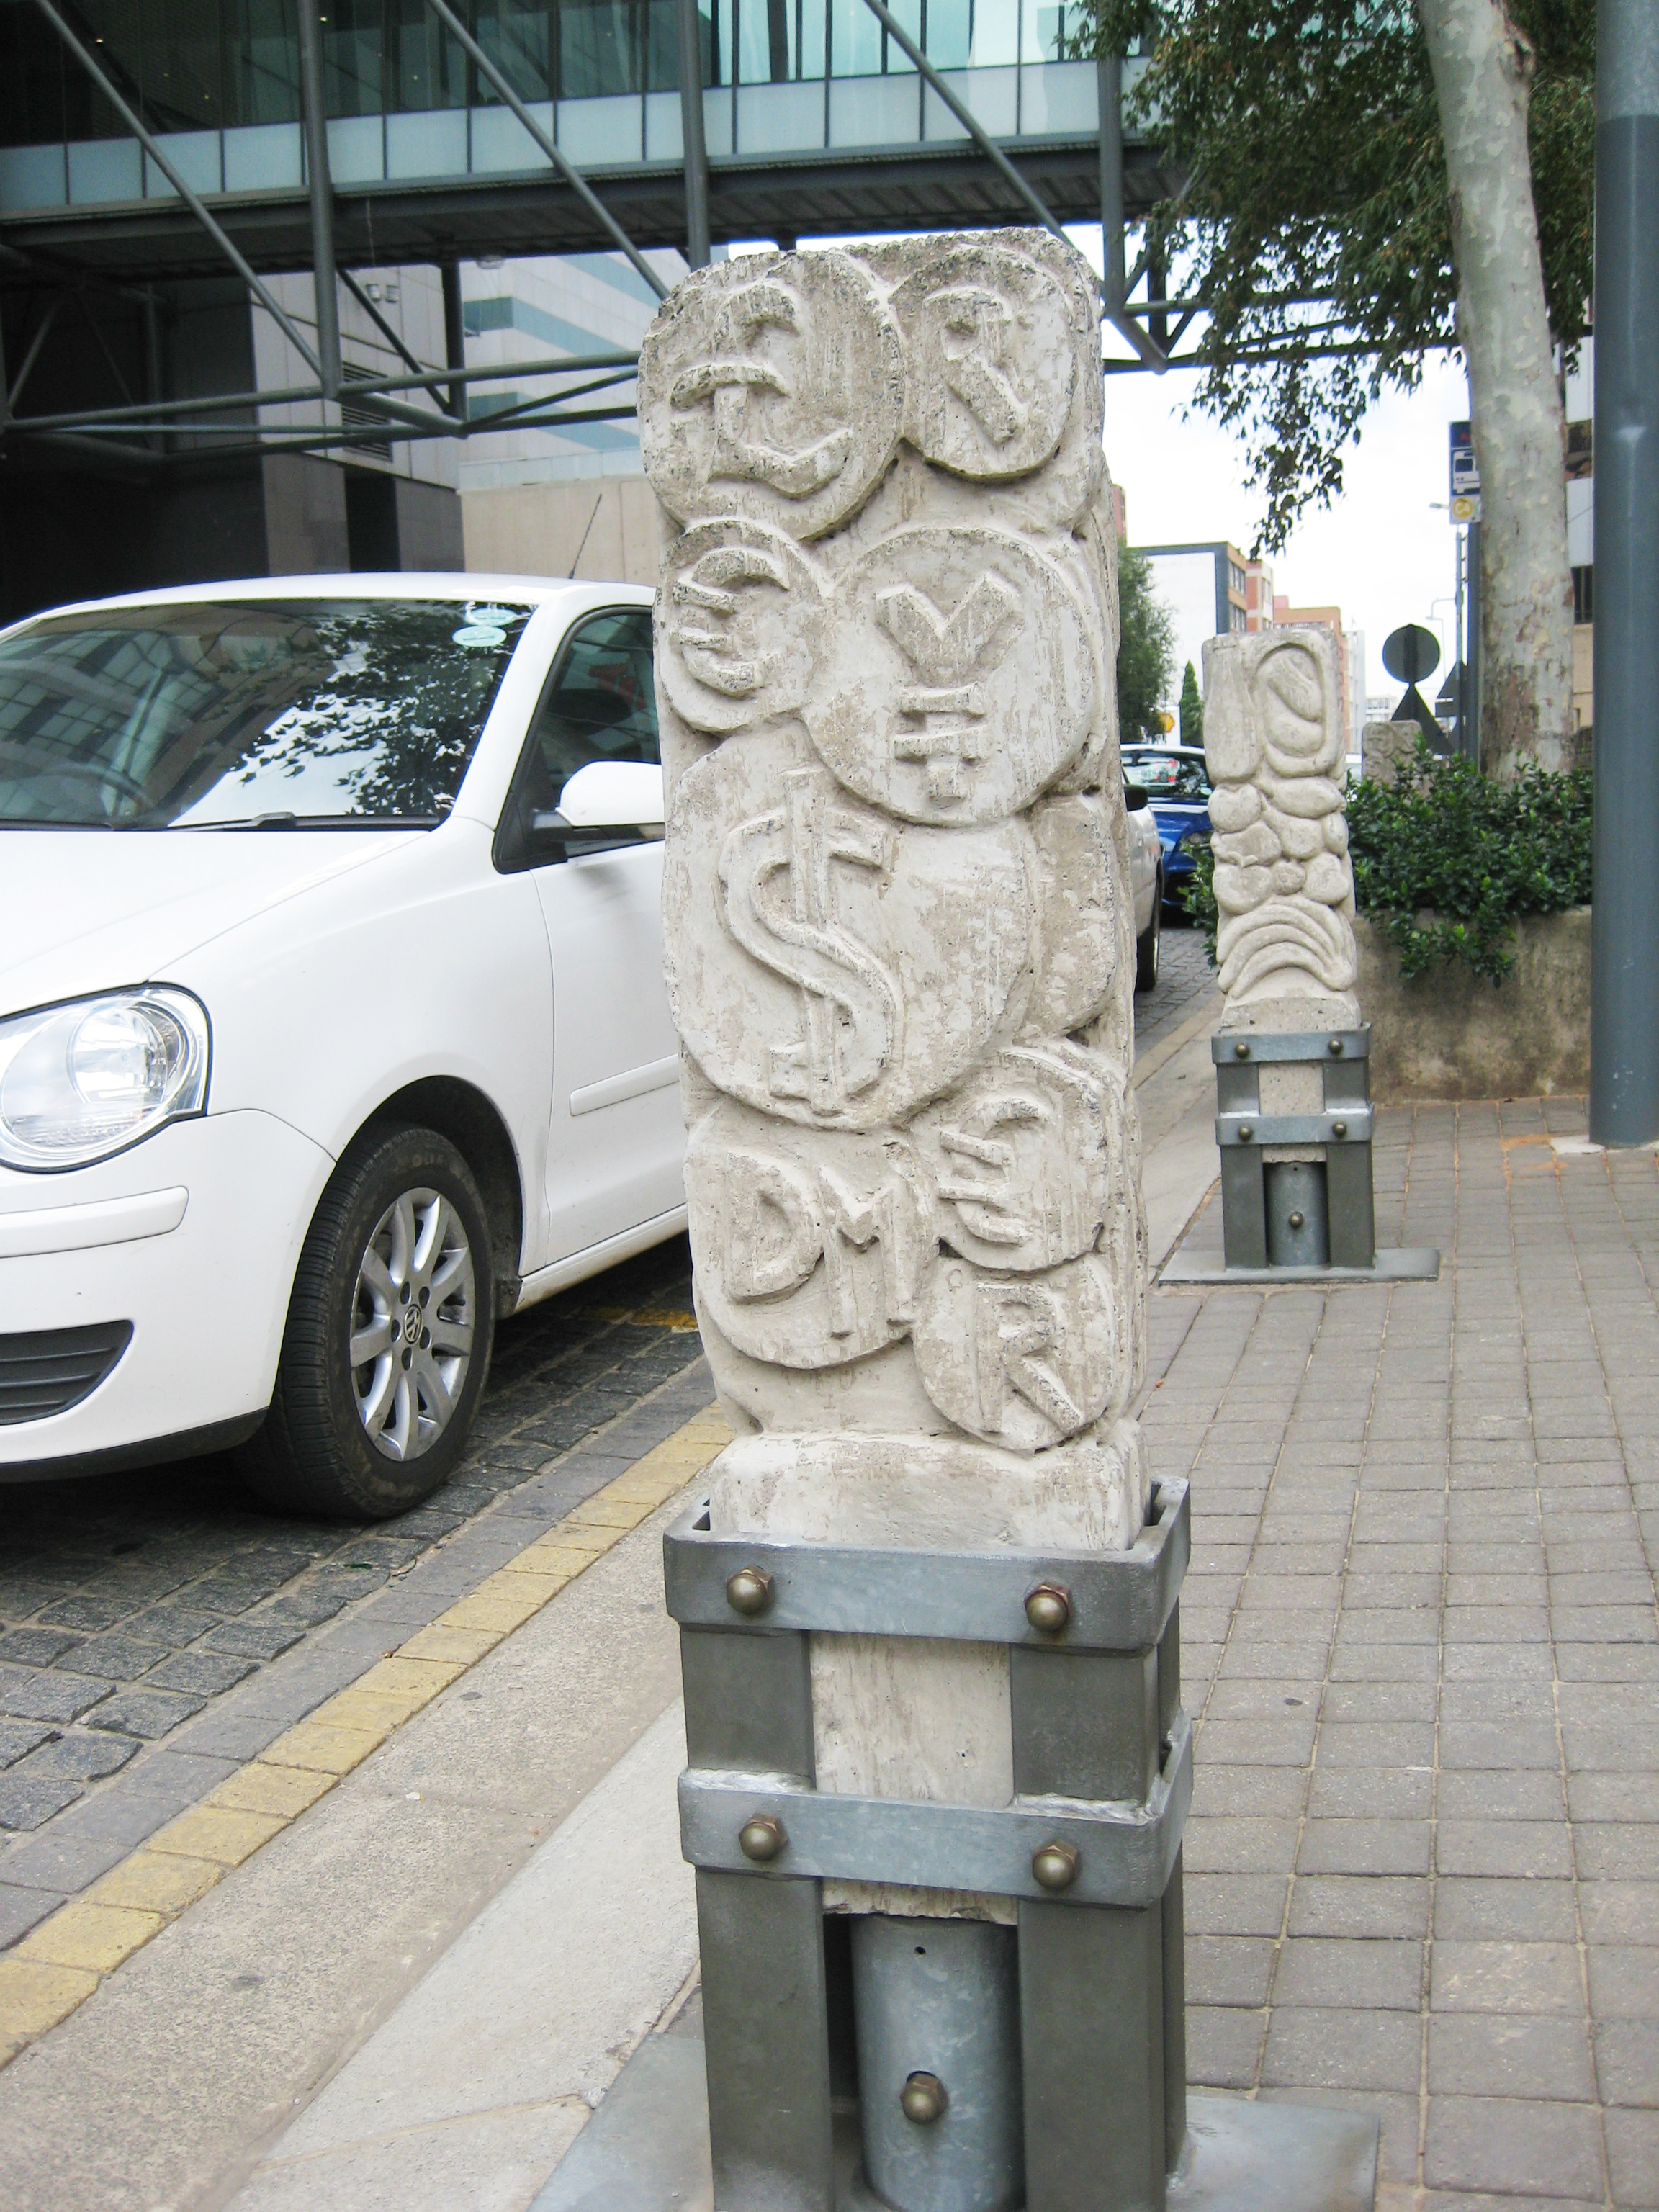 Decorated bollards in the banking district